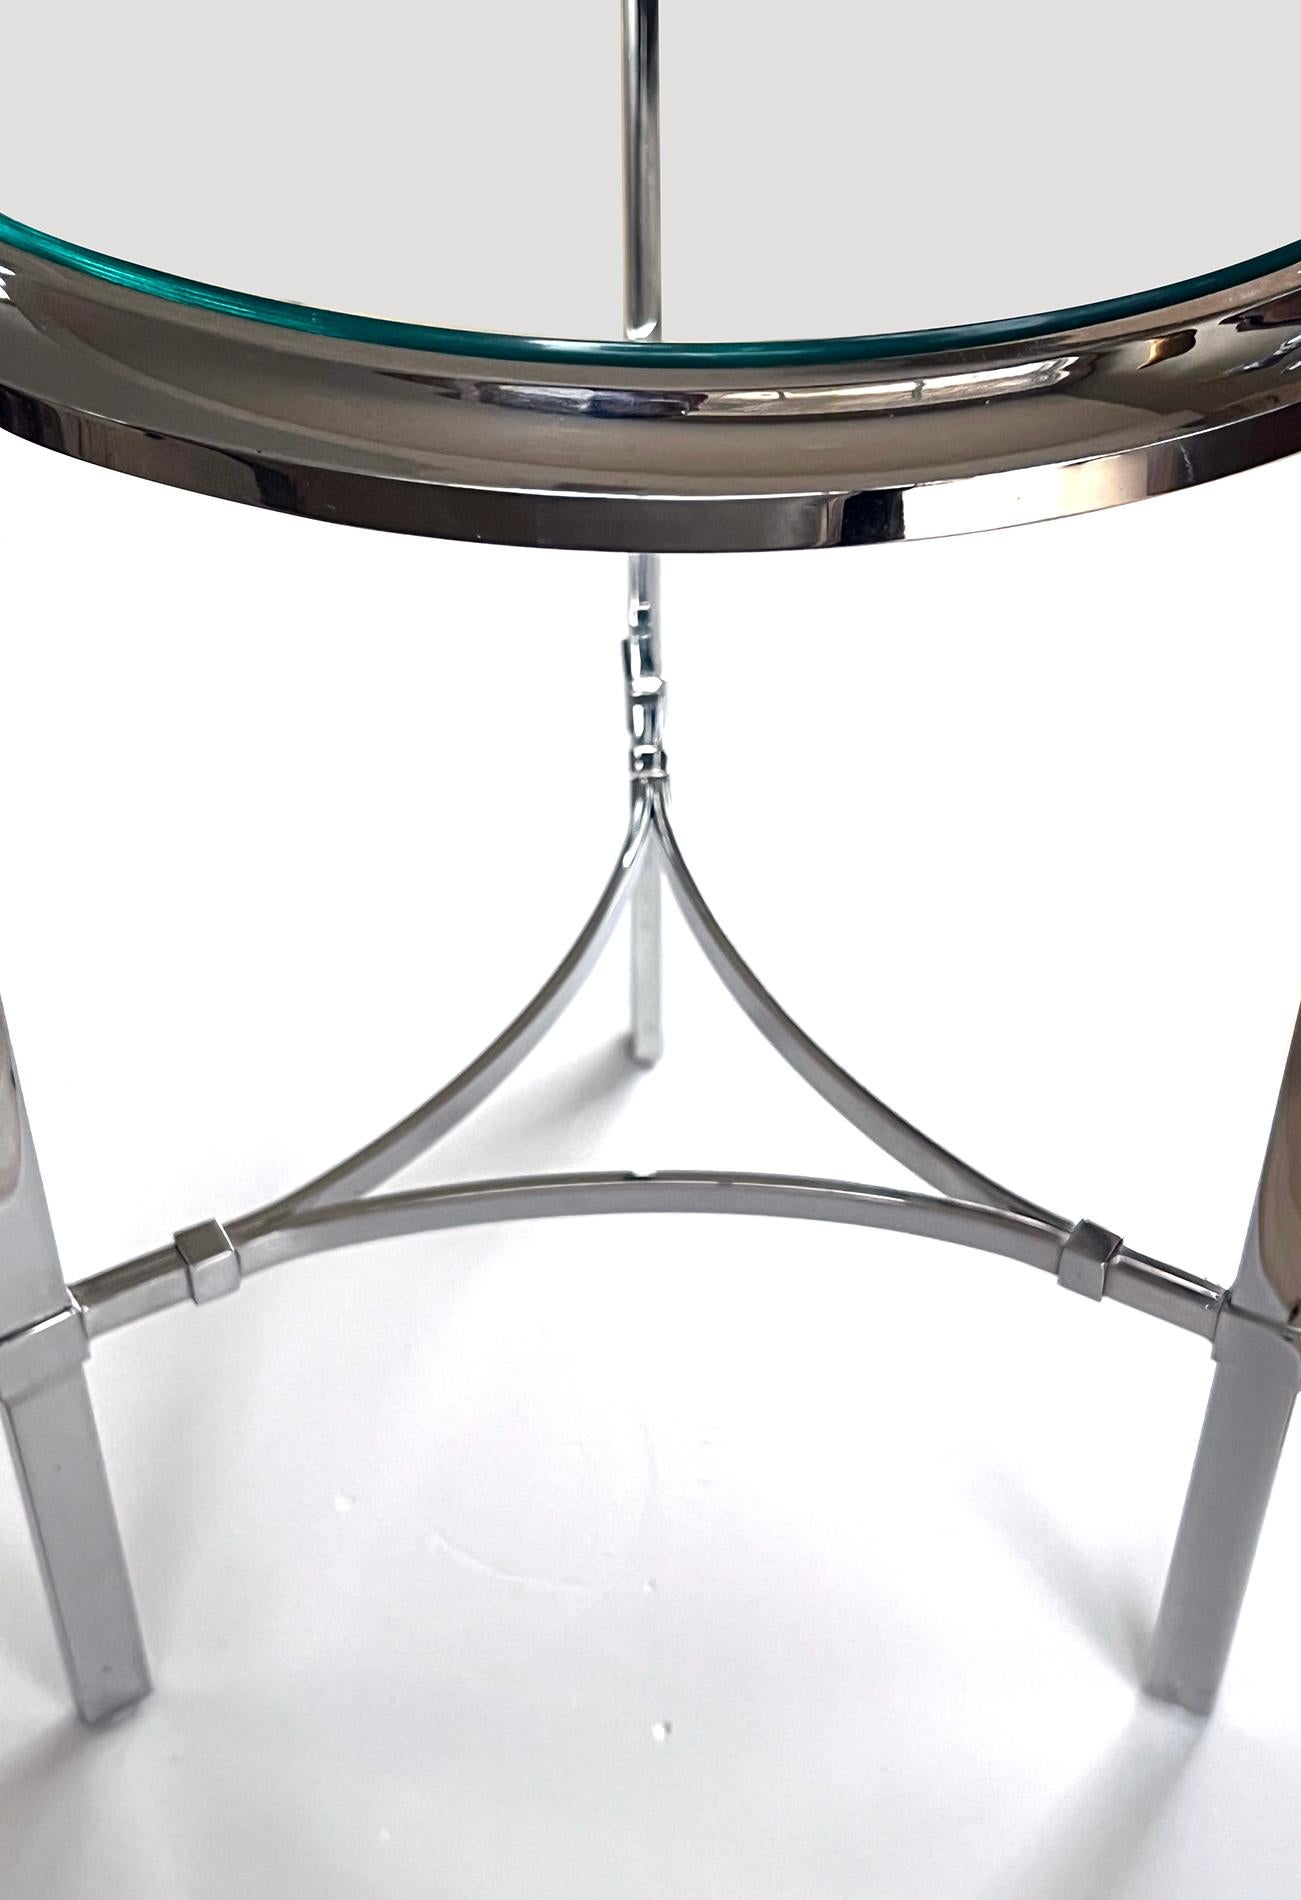 Plated A Solid Chrome-plated Steel Circular Occasional Table with Glass Top For Sale